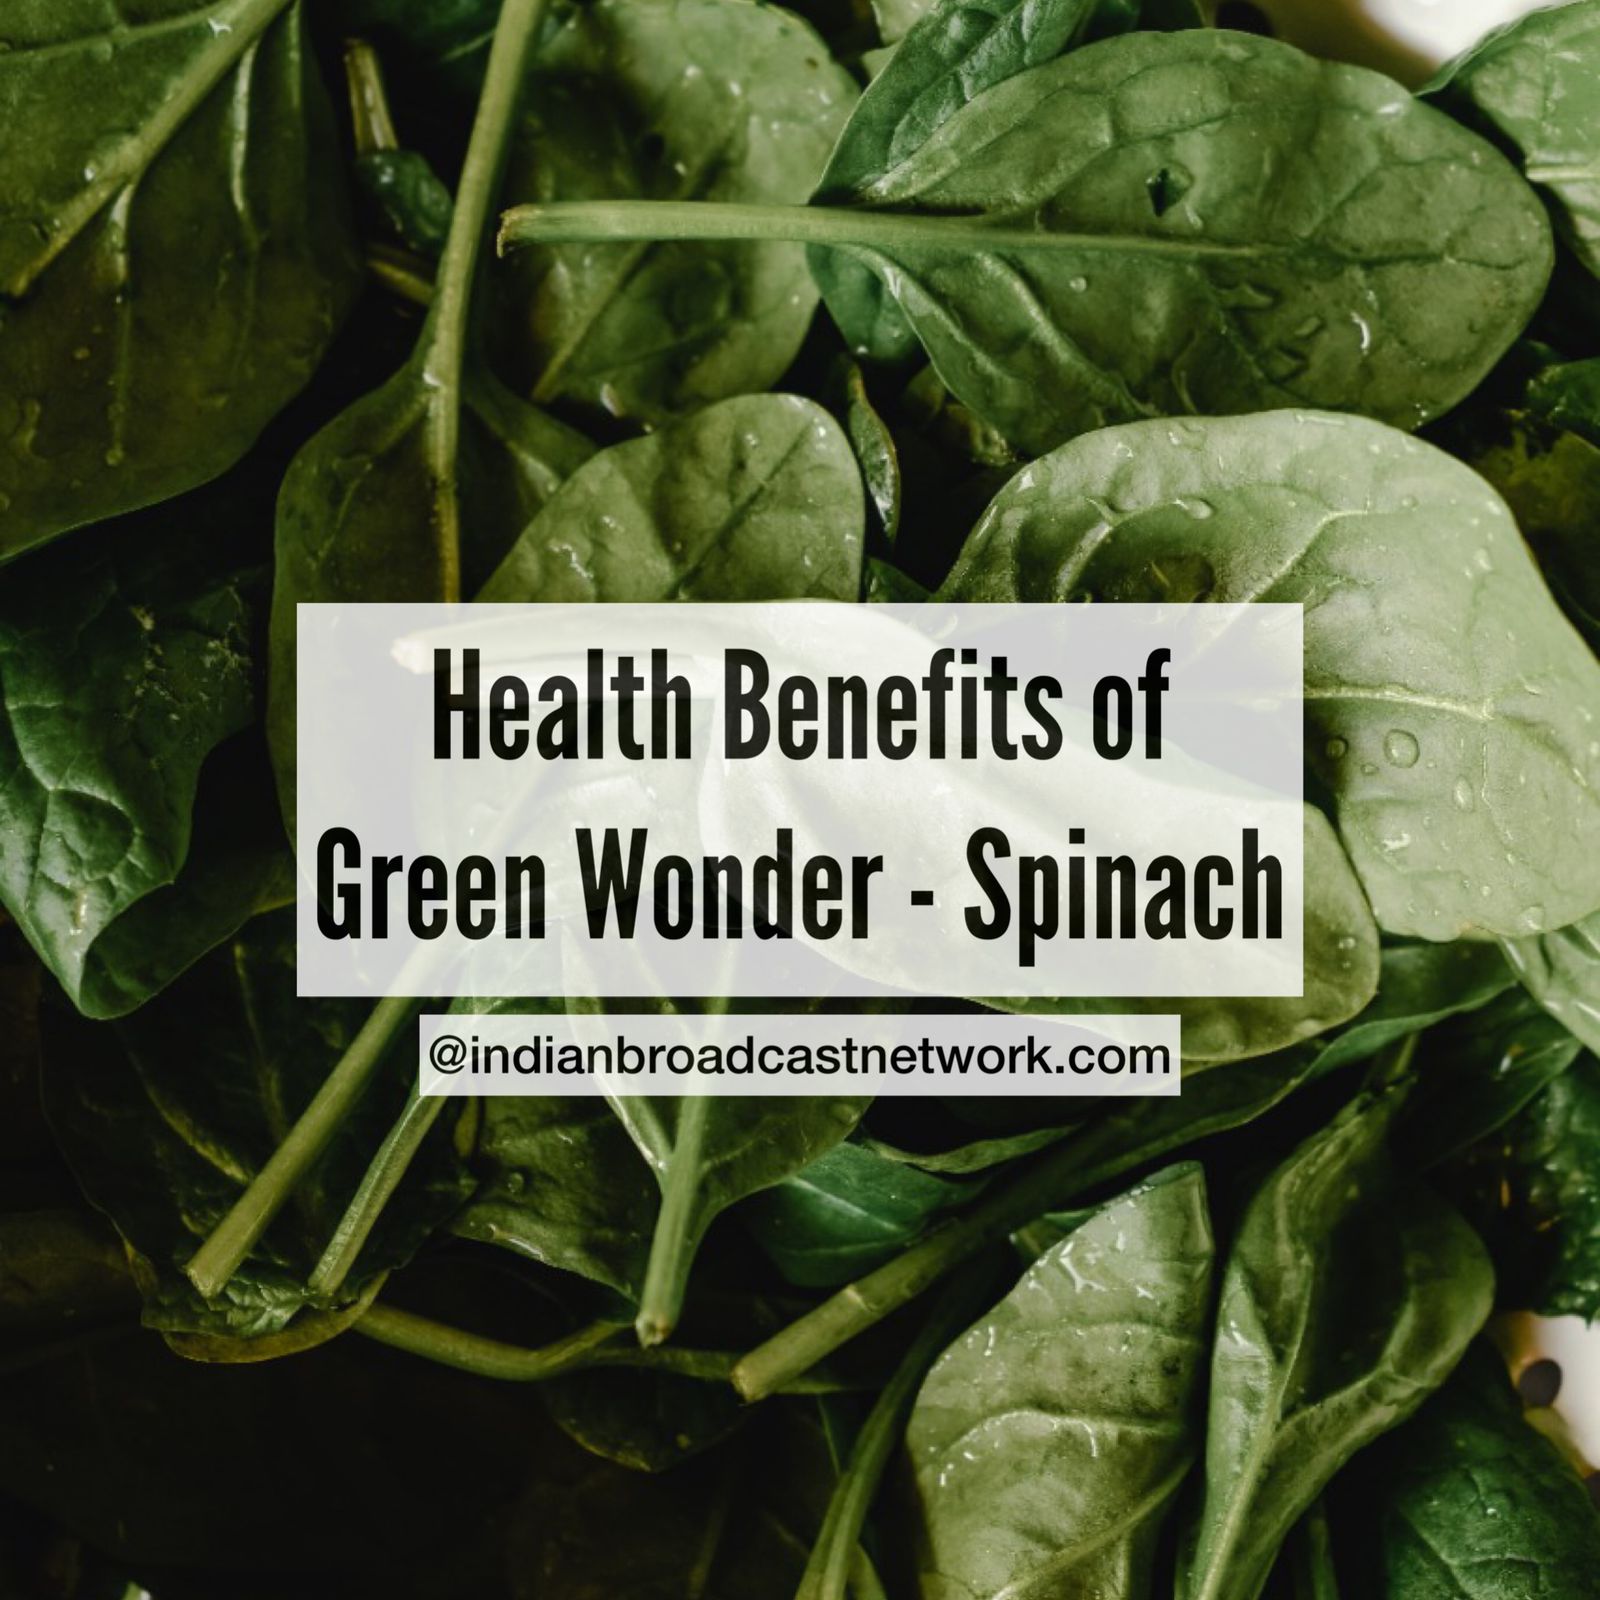 Indian Broadcast Network - Health Benefits of Spinach on National Spinach Day